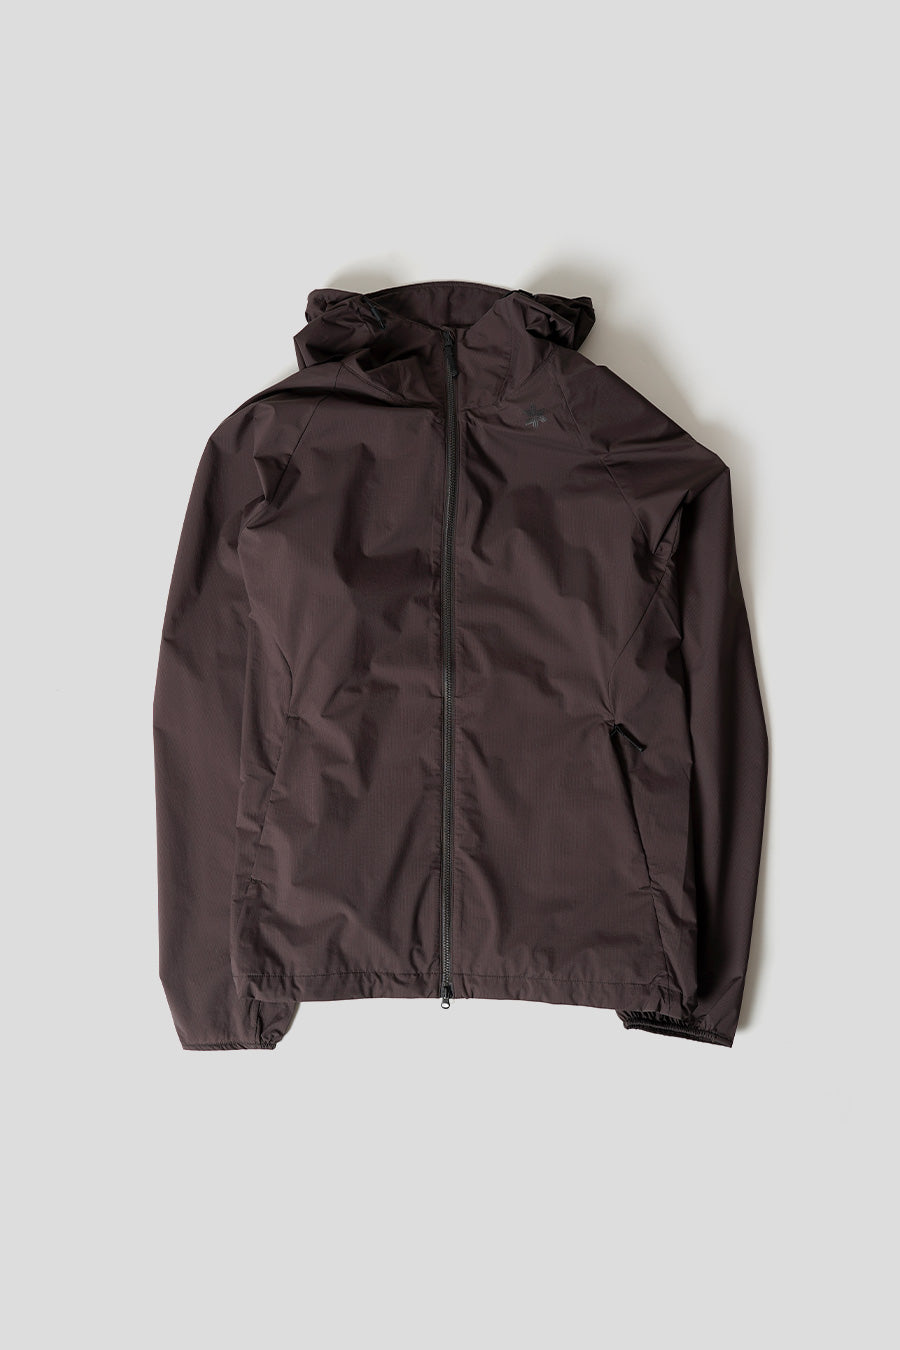 GOLDWIN - DOUBLE WEAVE GILL WIND JACKET BROWN - LE LABO STORE